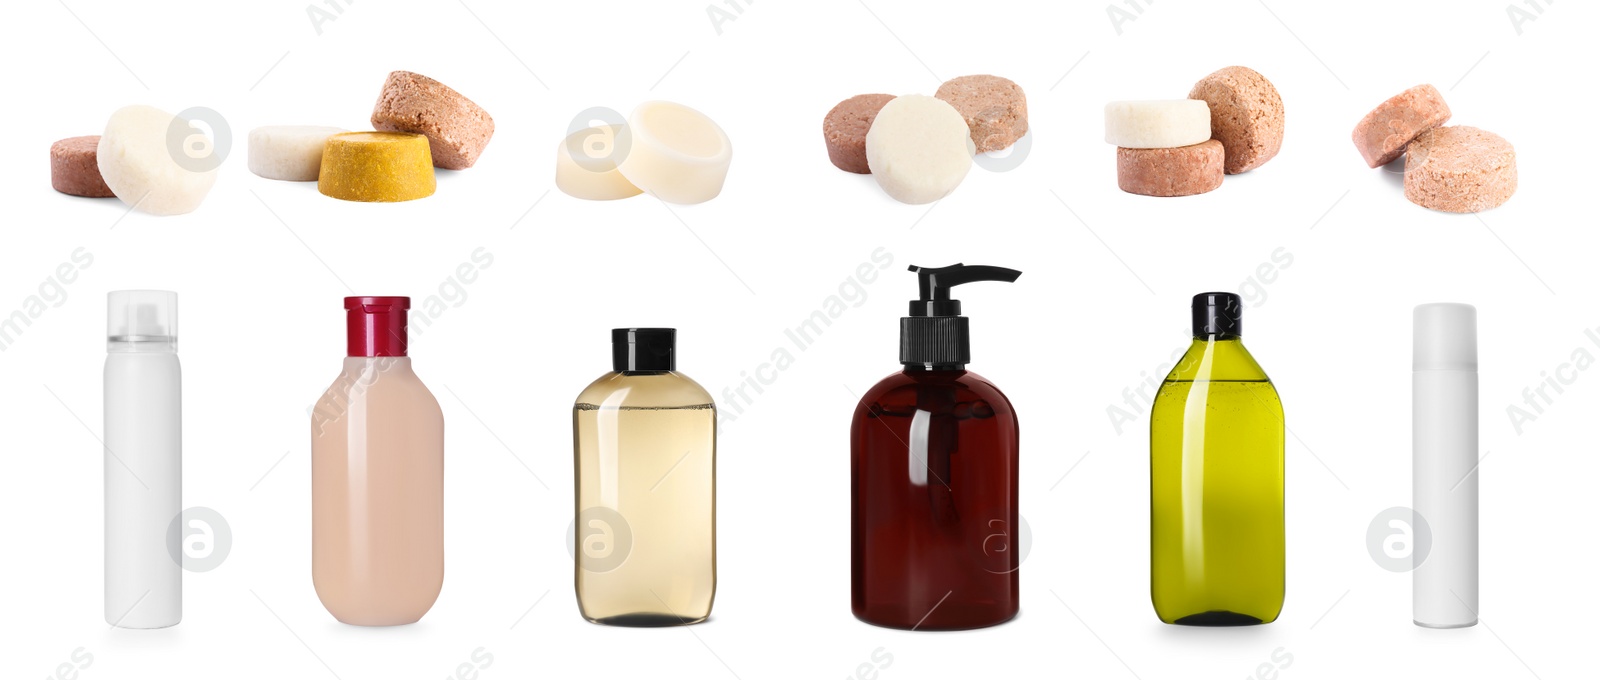 Image of Set with different kinds of shampoo: ordinary, dry and solid on white background. Banner design